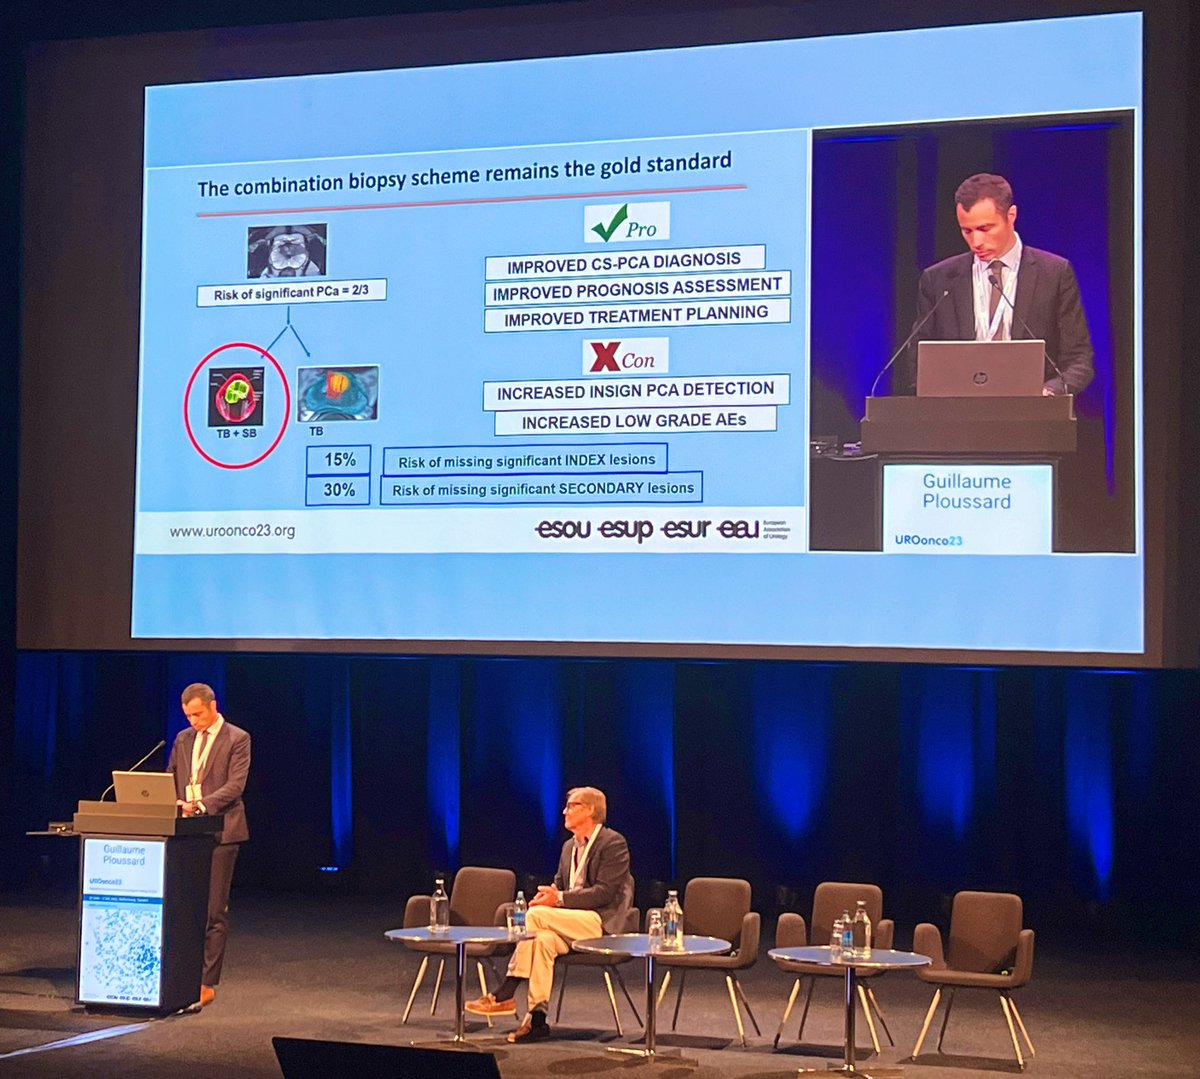 Great presentation by @GPloussard at #UroOnco23 about prostate biopsy scheme 🔝 @EAU_Uroonco